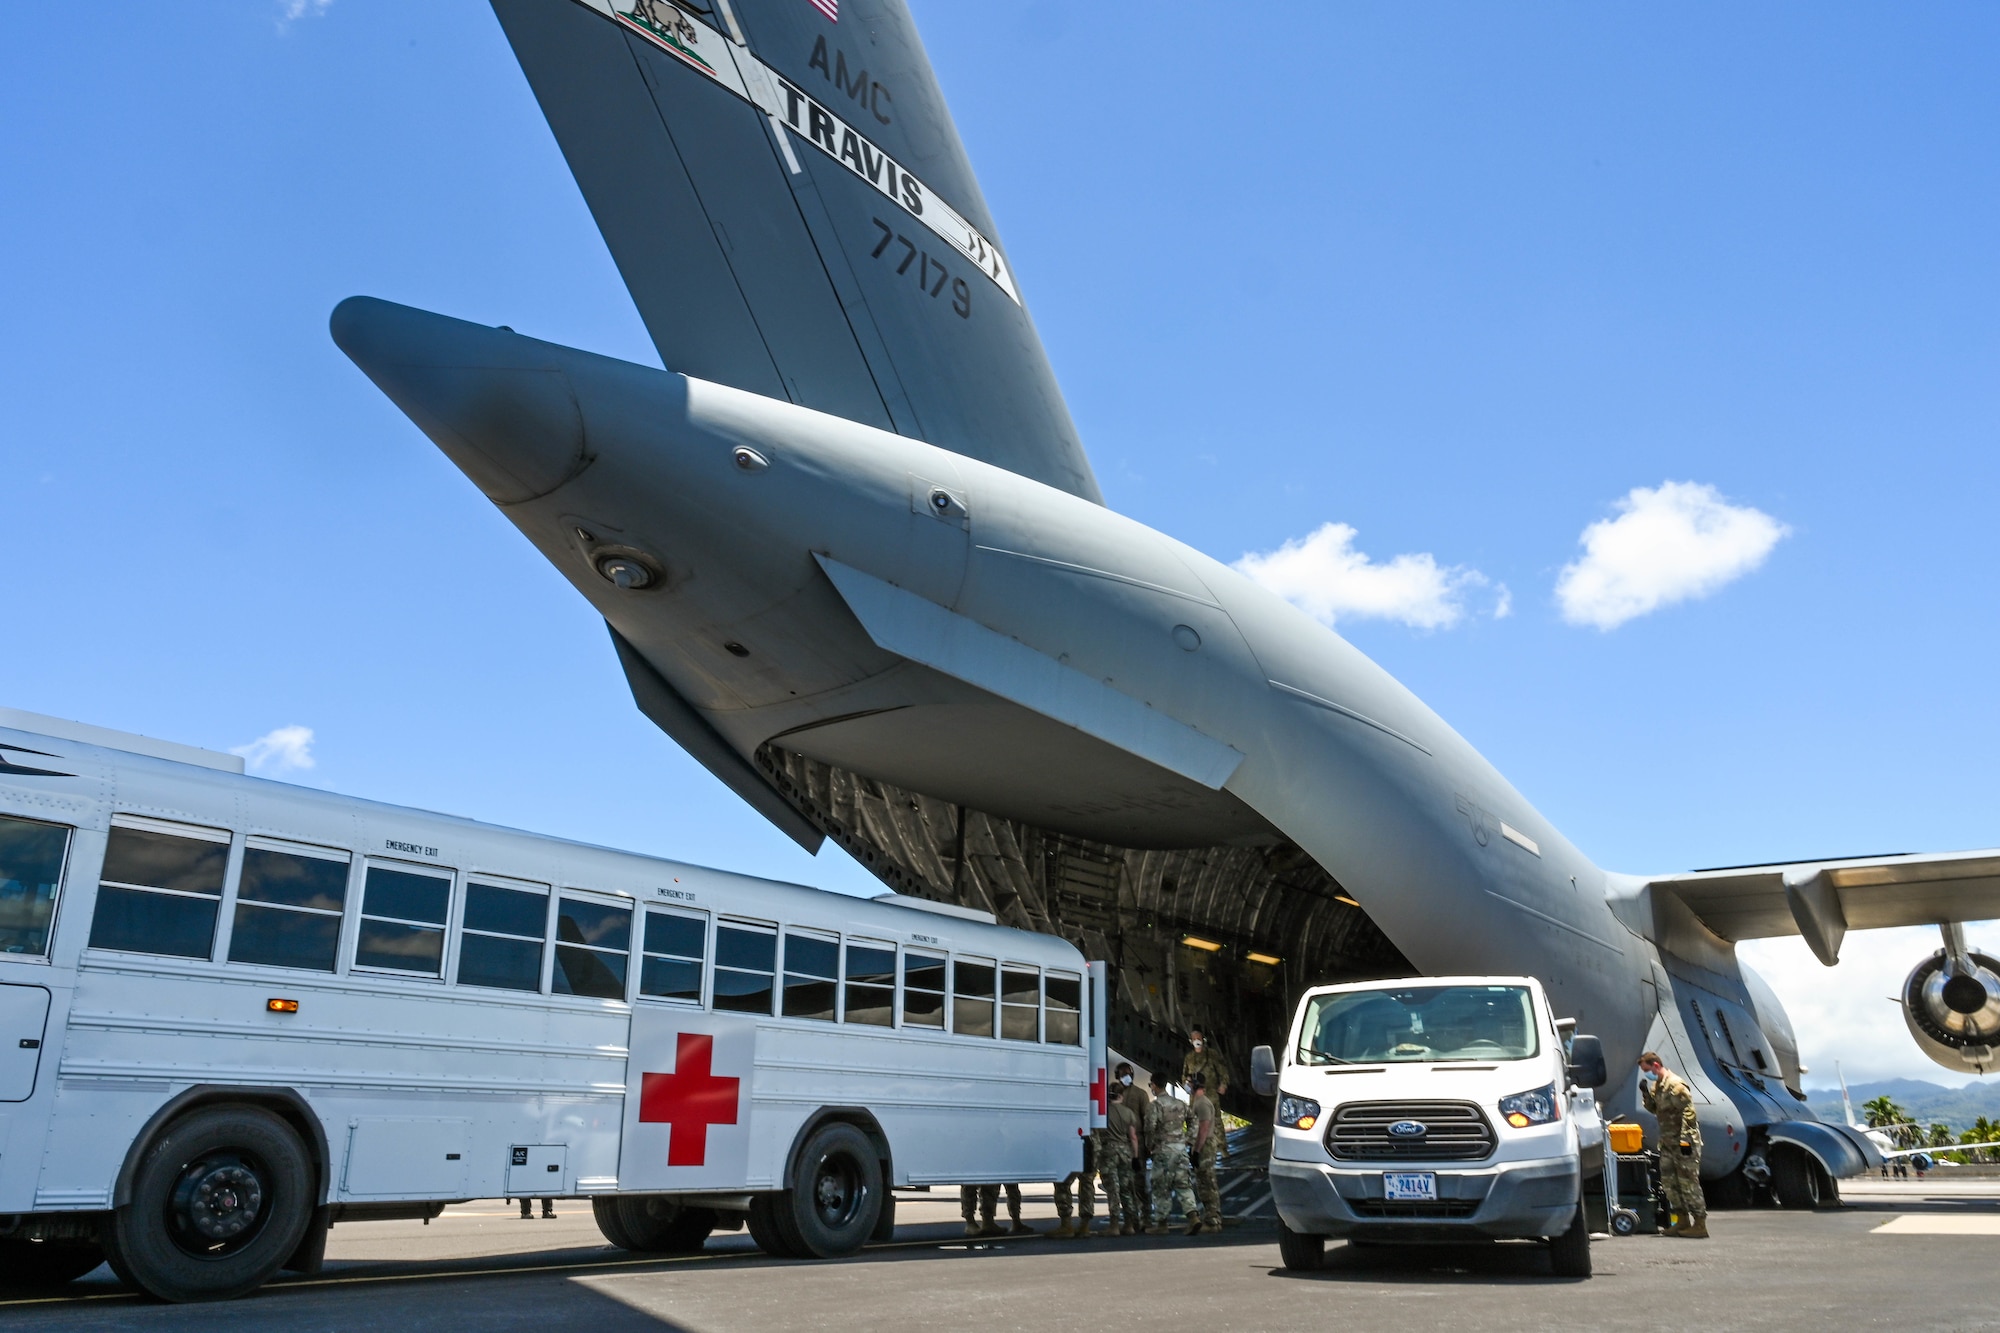 Hickam Airmen work alongside Airmen from Travis Air Force Base, California, and Joint Base San Antonio, Texas, during an aeromedical evacuation at Joint Base Pearl Harbor-Hickam, July 27, 2022. Airmen from all three installations came together to provide time sensitive, mission critical en route care to patients during a flight. (U.S. Air Force photo by Senior Airman Makensie Cooper)